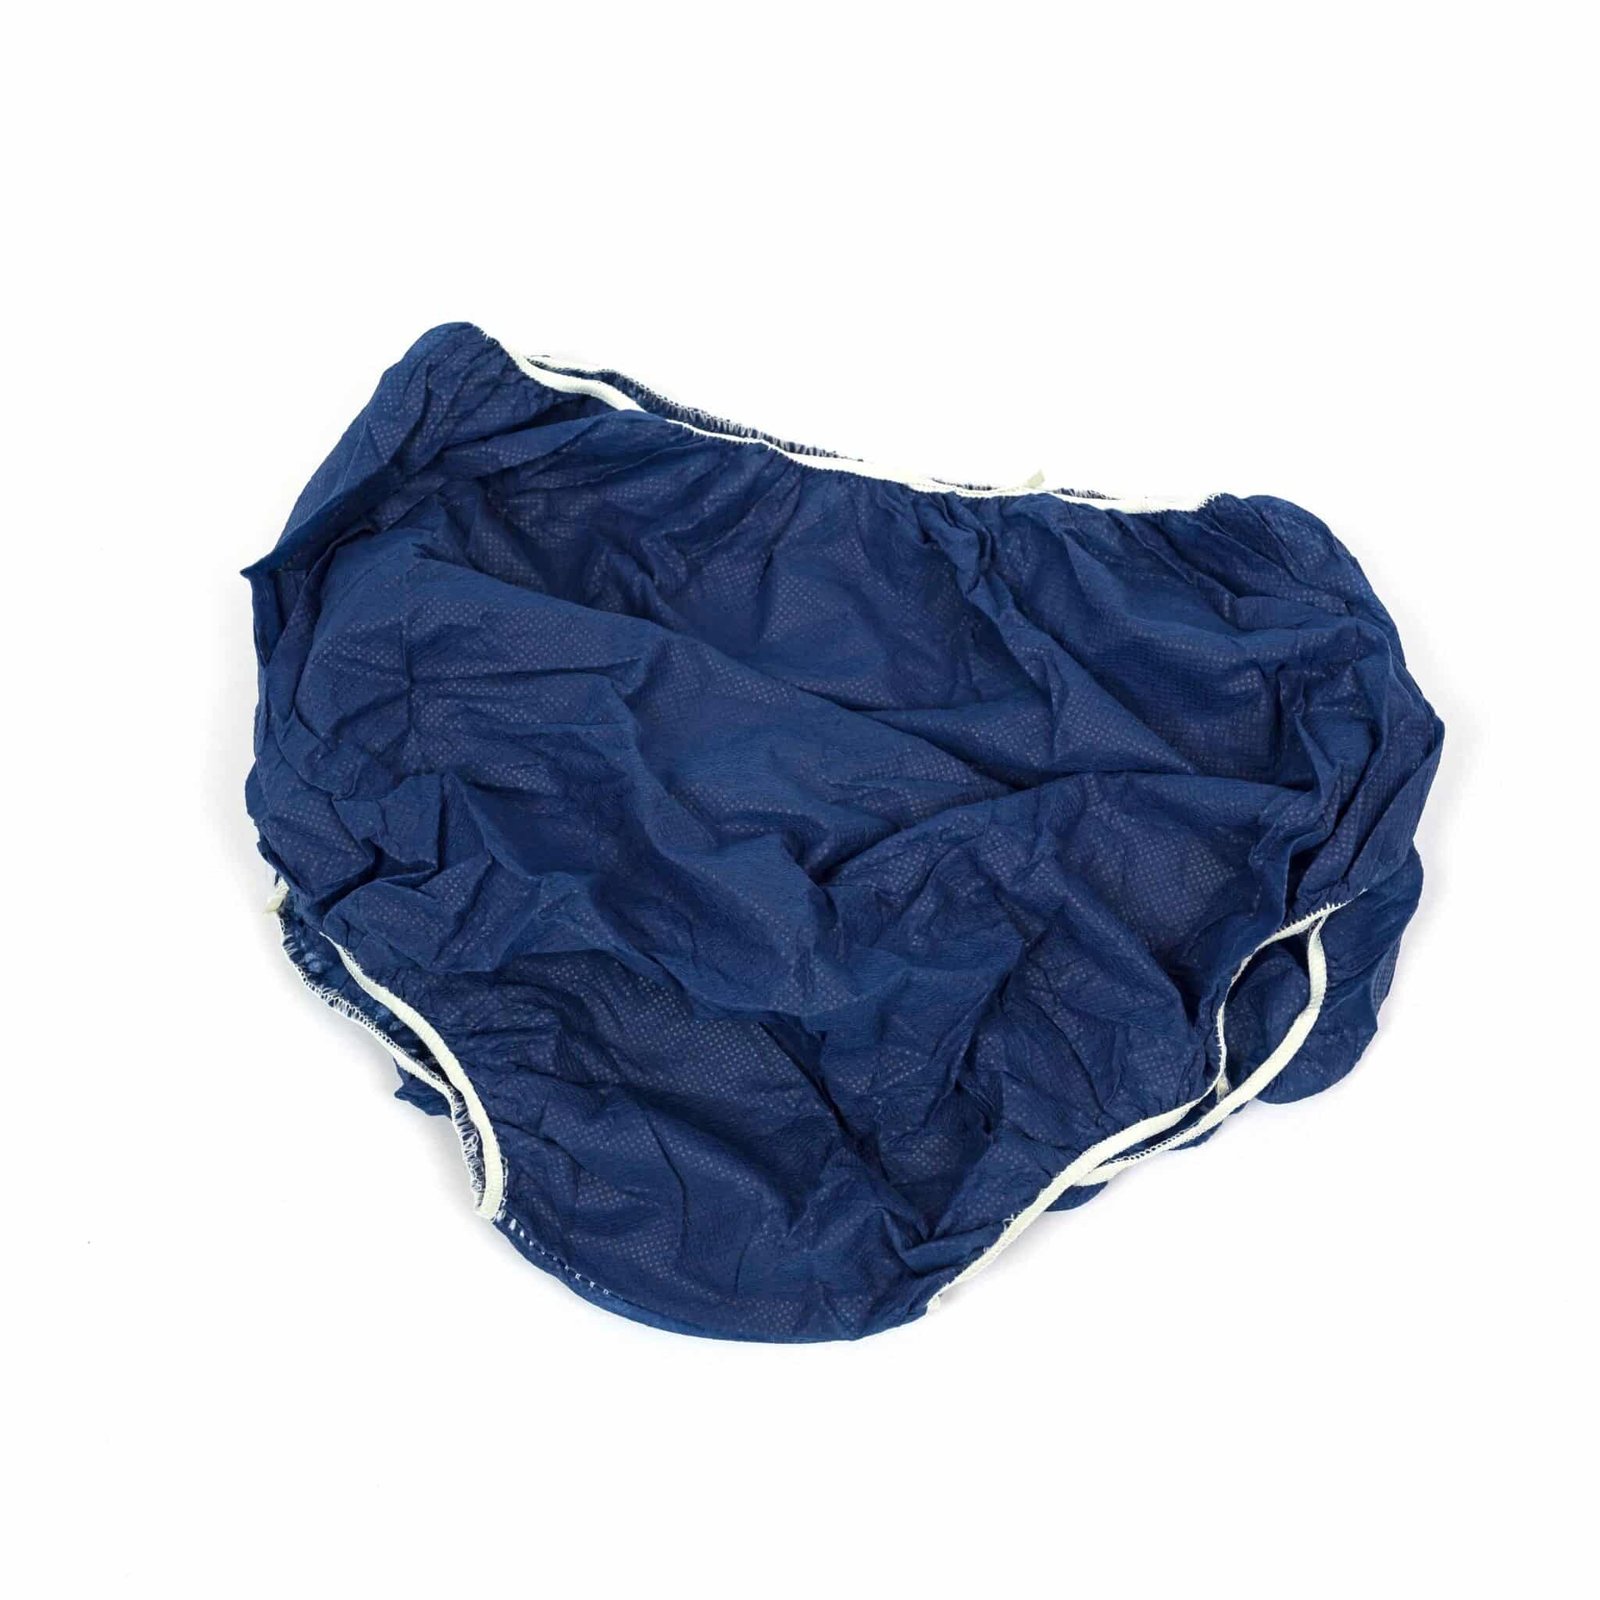 Women Disposable Underwear for Travel-Hospital Stays- Cotton Panties, High  Quality - China Underwear and Women Underwear price